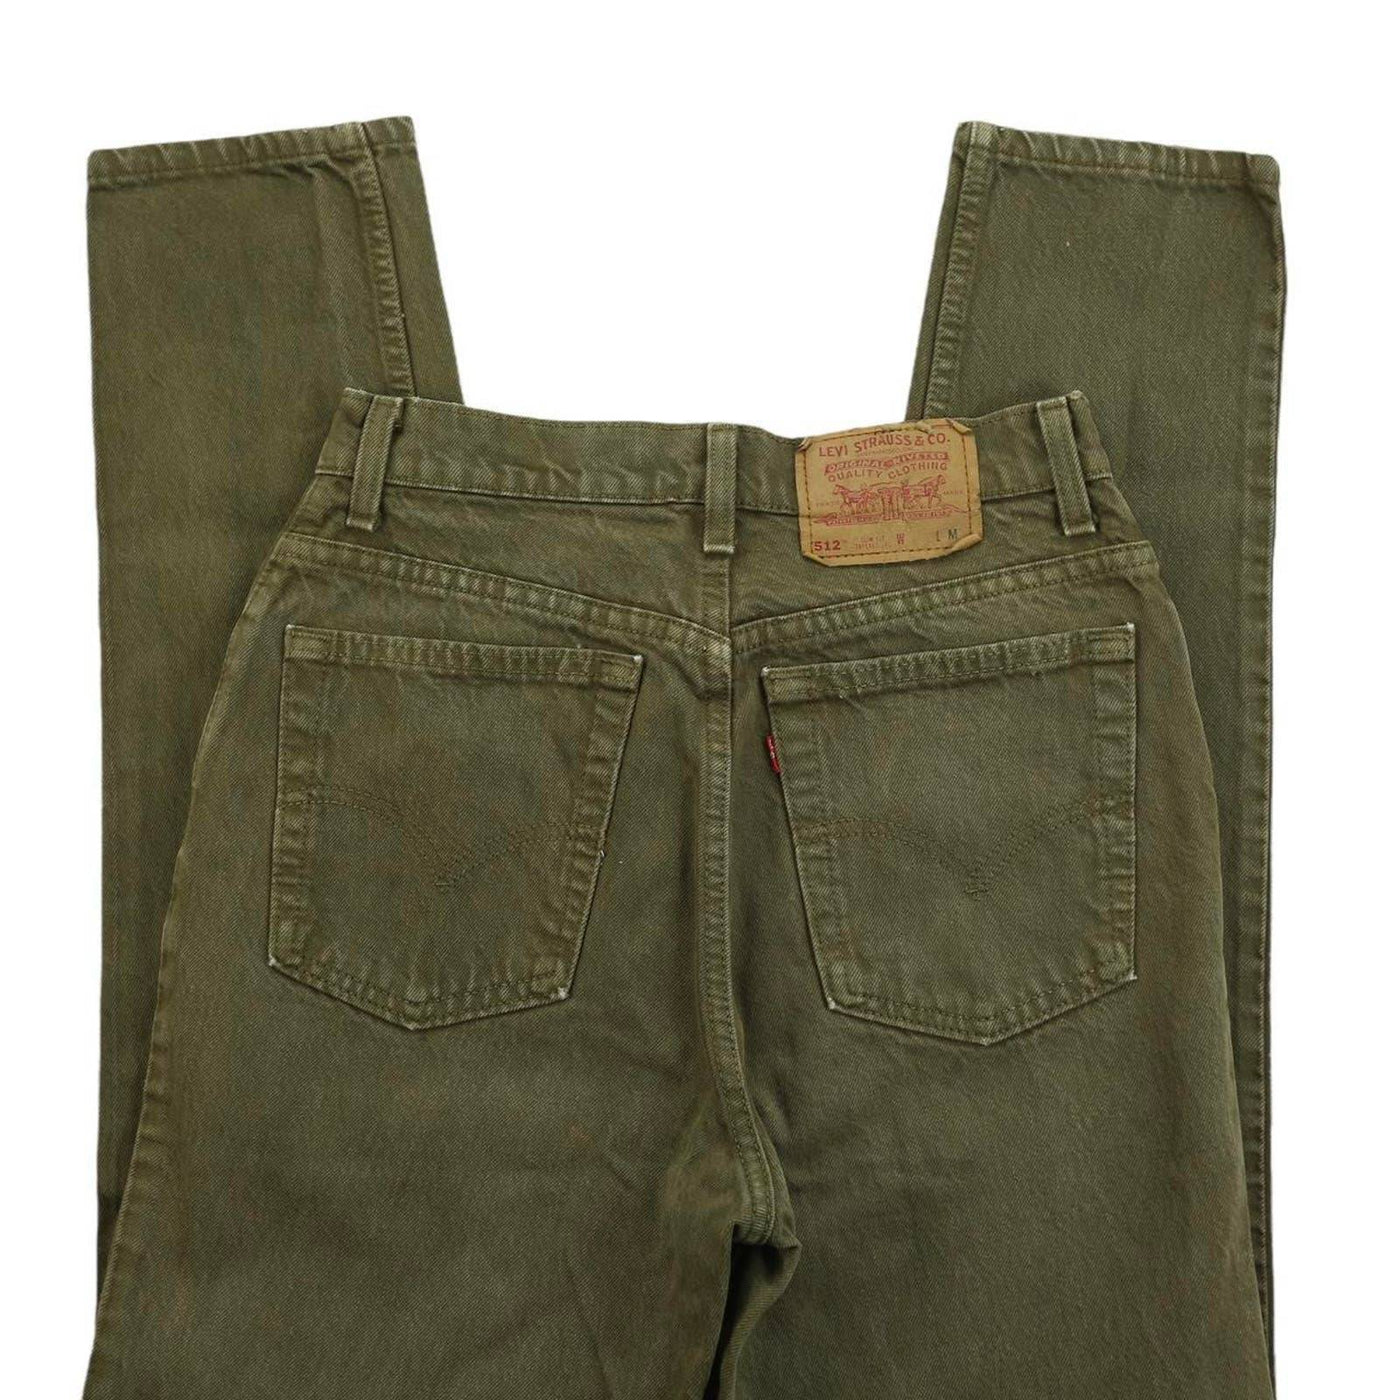 Vintage Levi’s 512 Brown High Waisted Jeans.